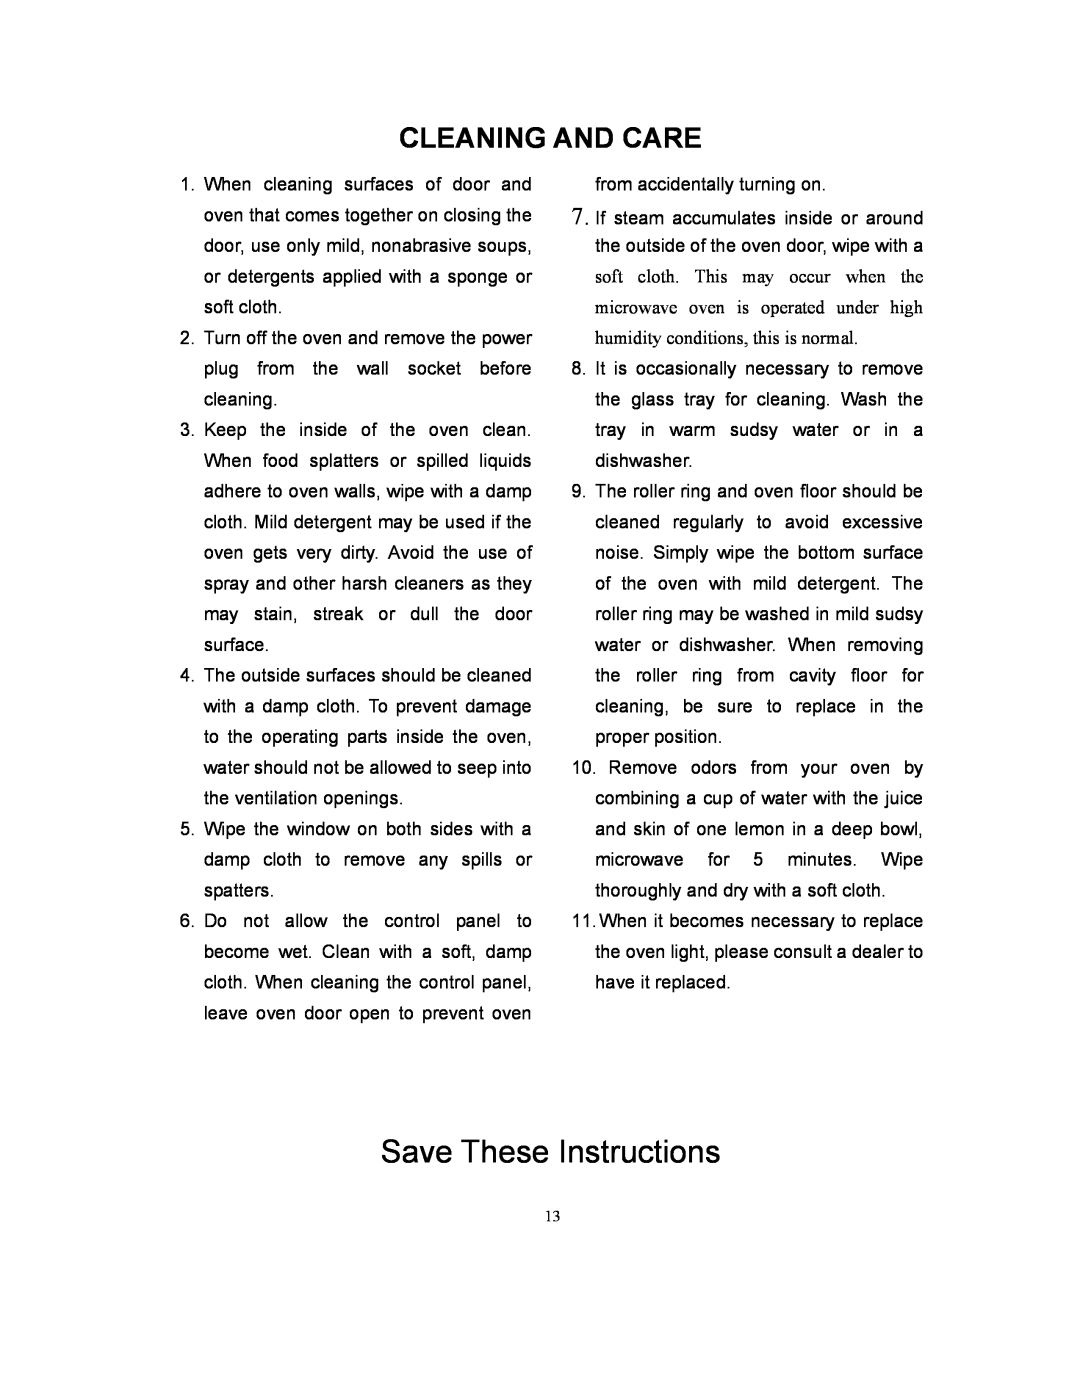 Kenmore 87032 owner manual Save These Instructions, Cleaning And Care 